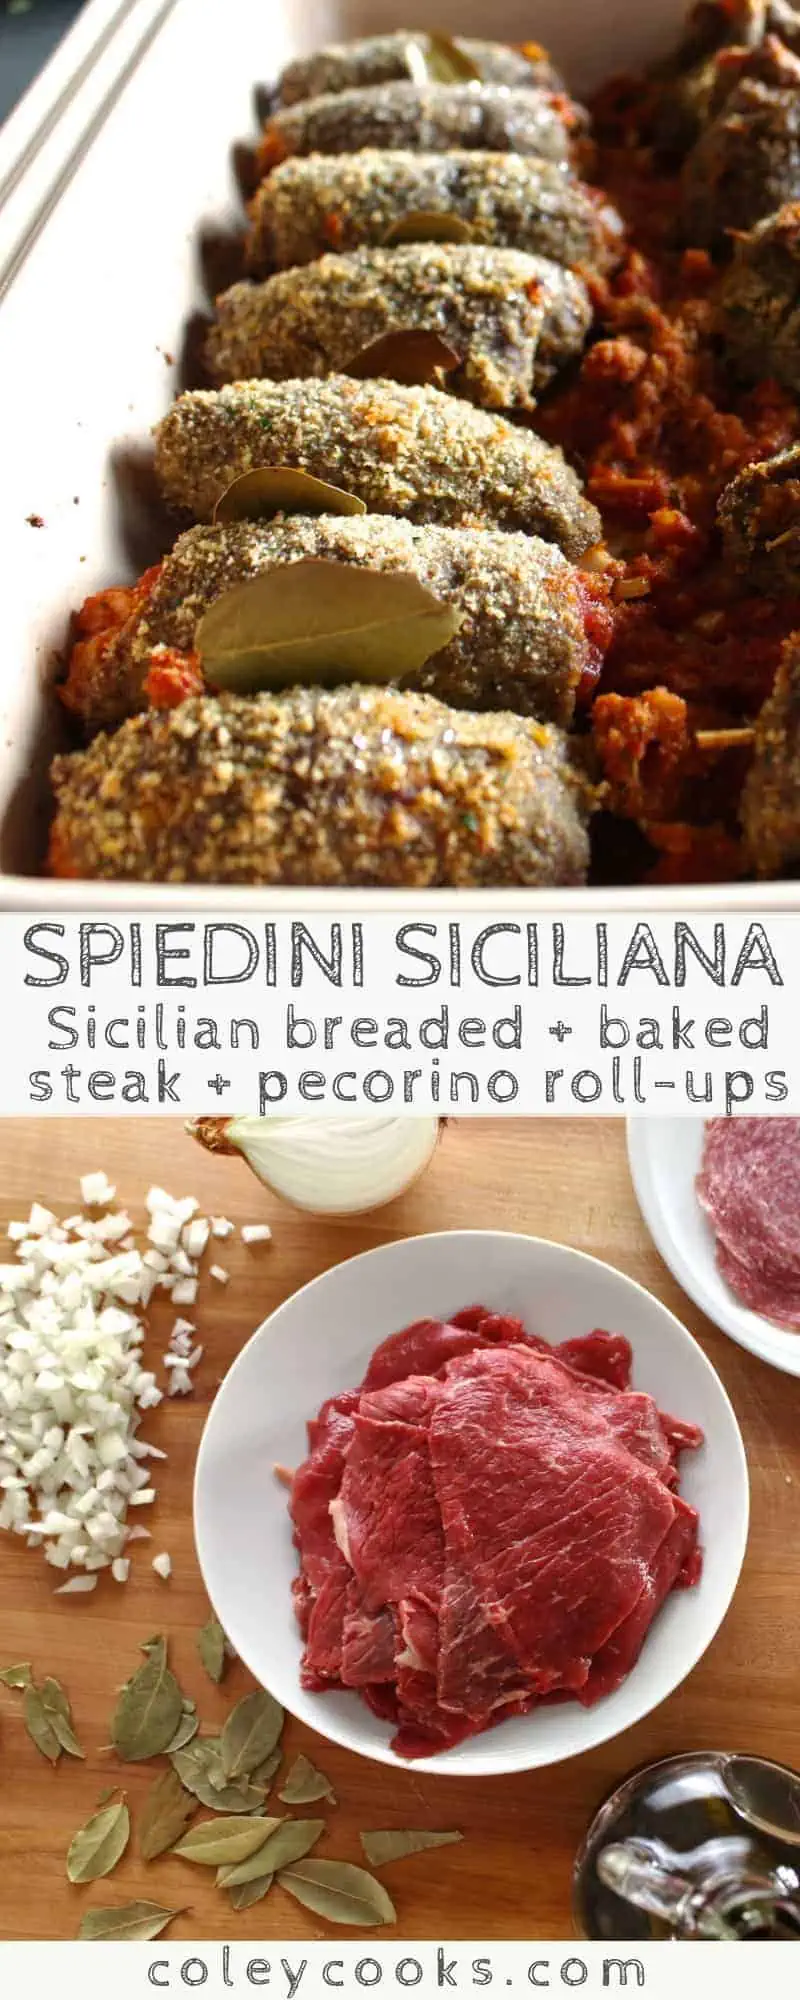 Spiedini Siciliana | My family's authentic Sicilian recipe for spiedini. Thinly sliced beef, breaded + stuffed with tomatoes, cheese and onions. Great holiday recipe! #easy #christmas #recipe #appetizer #holidays #beef #Sicilian | ColeyCooks.com